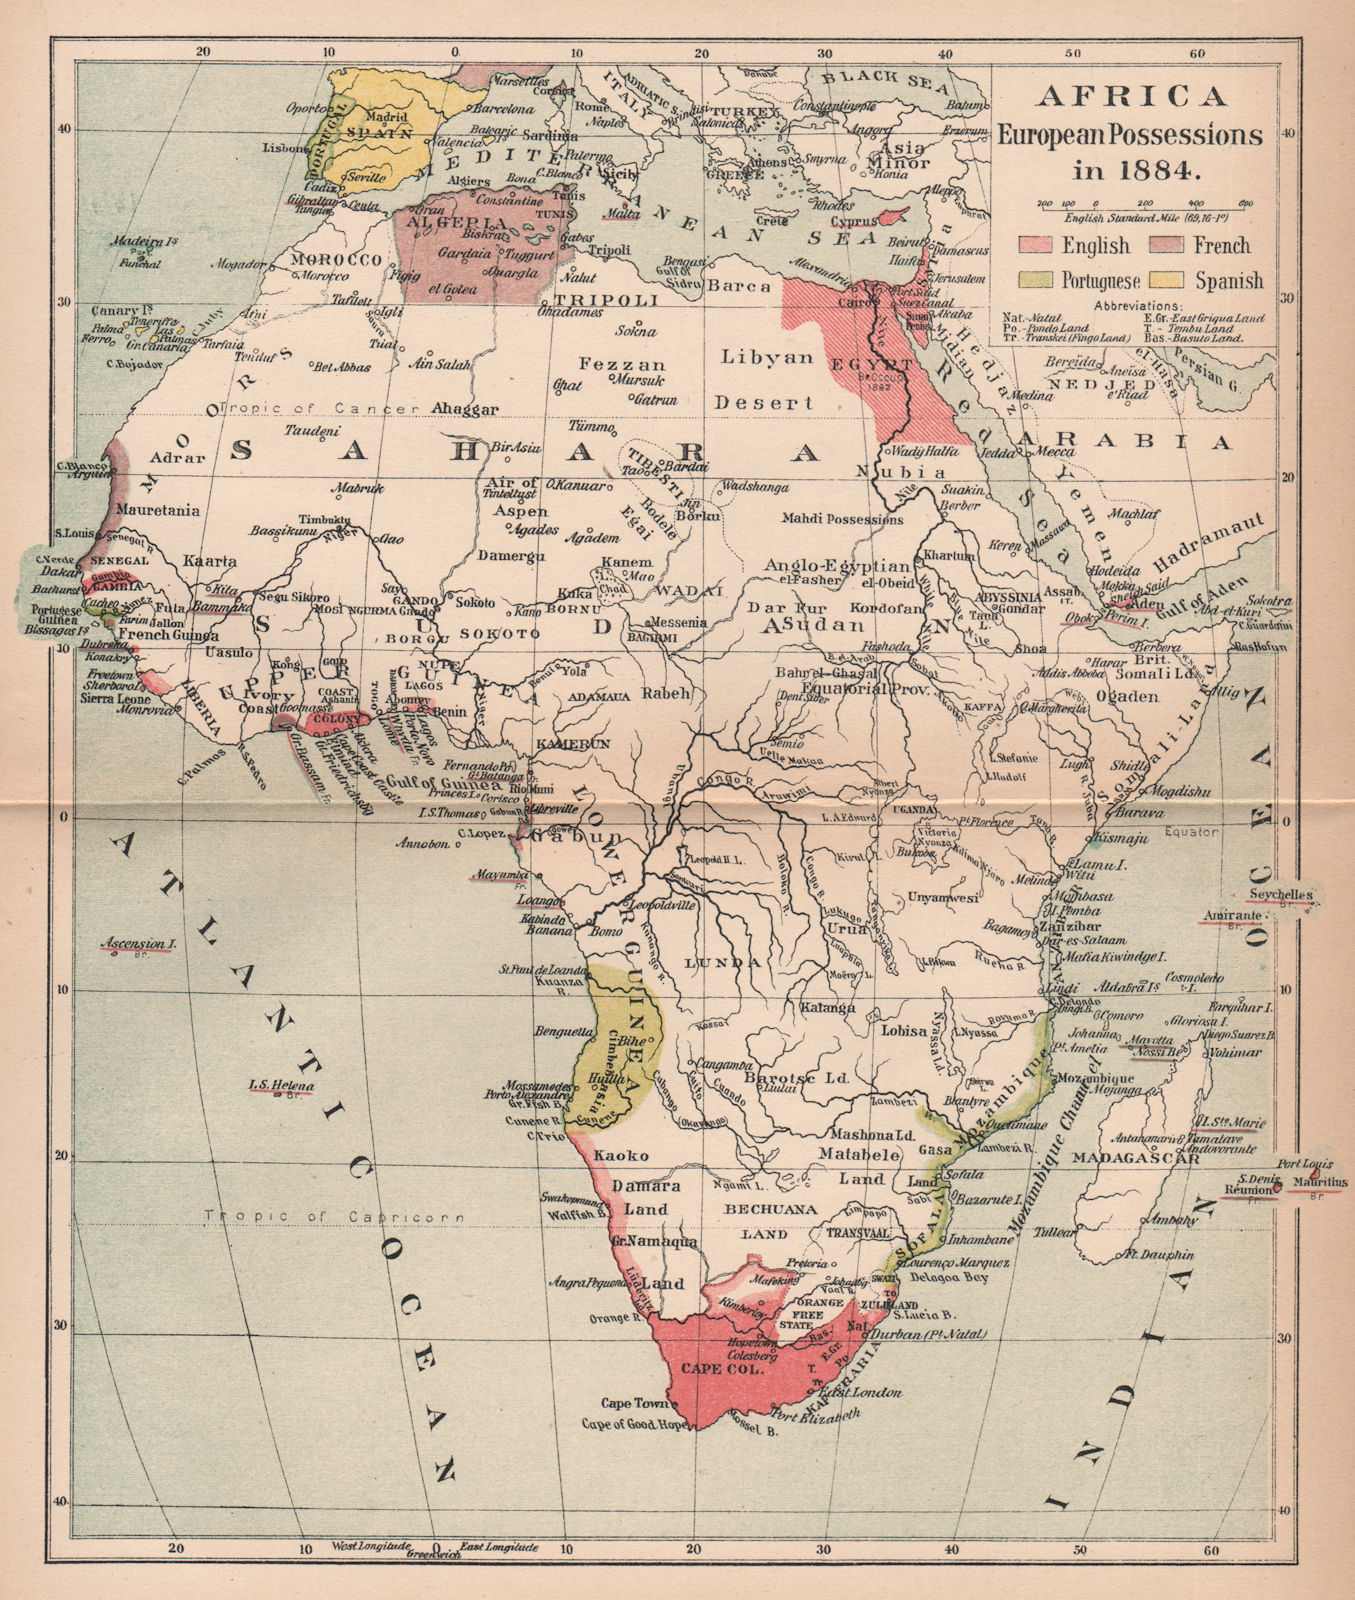 AFRICA 1884. European possessions colonies. English French Portuguese 1910 map